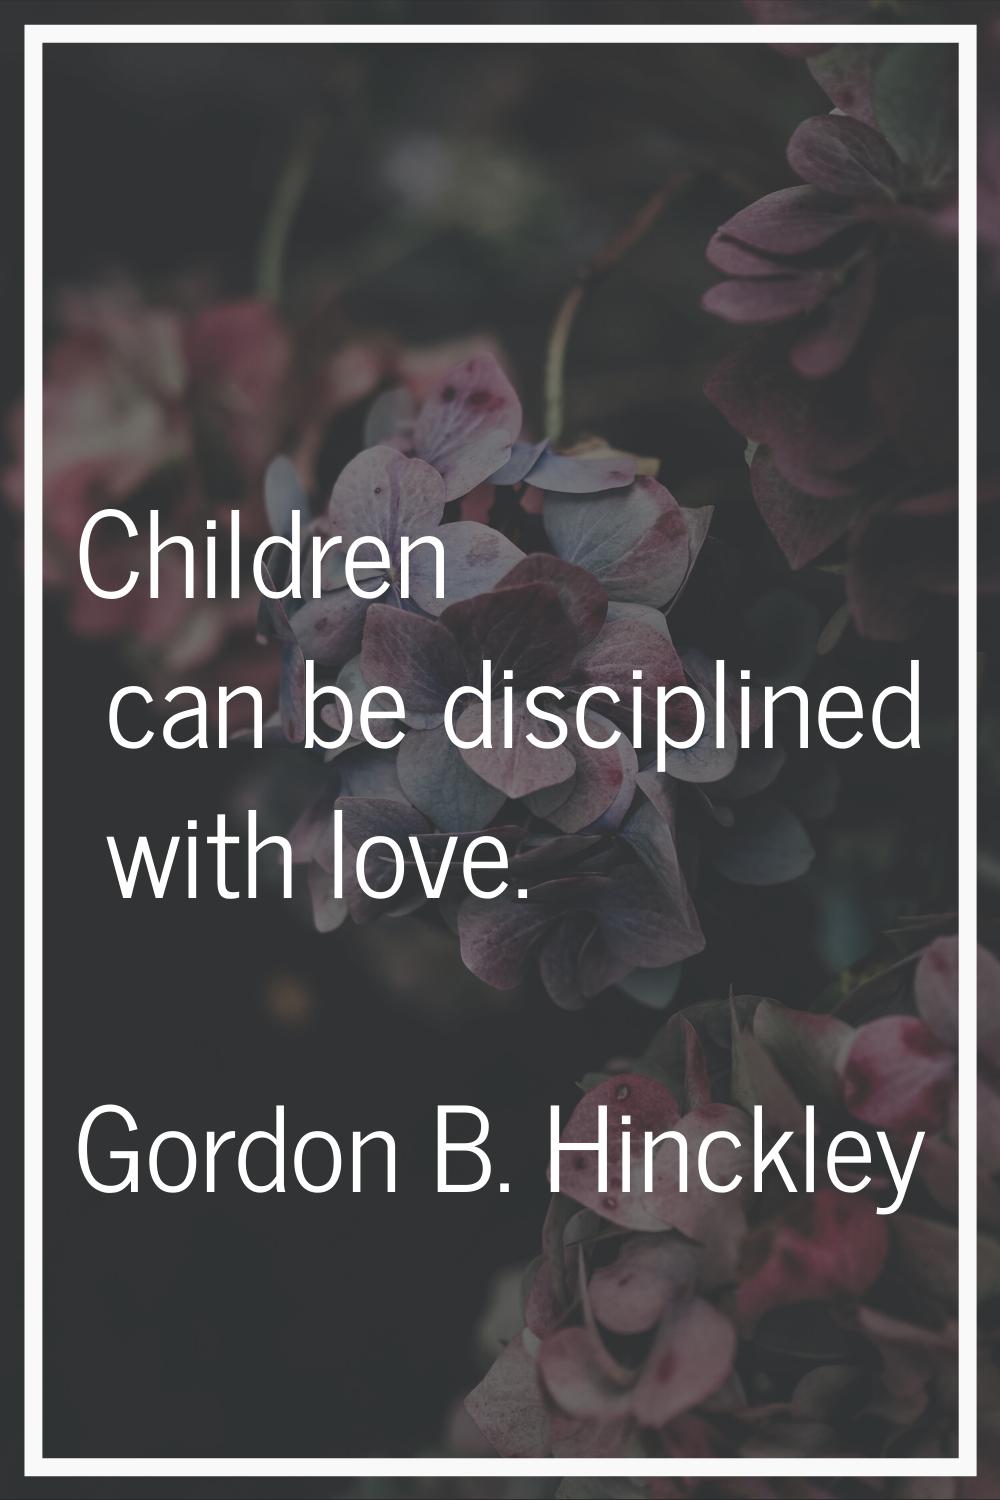 Children can be disciplined with love.